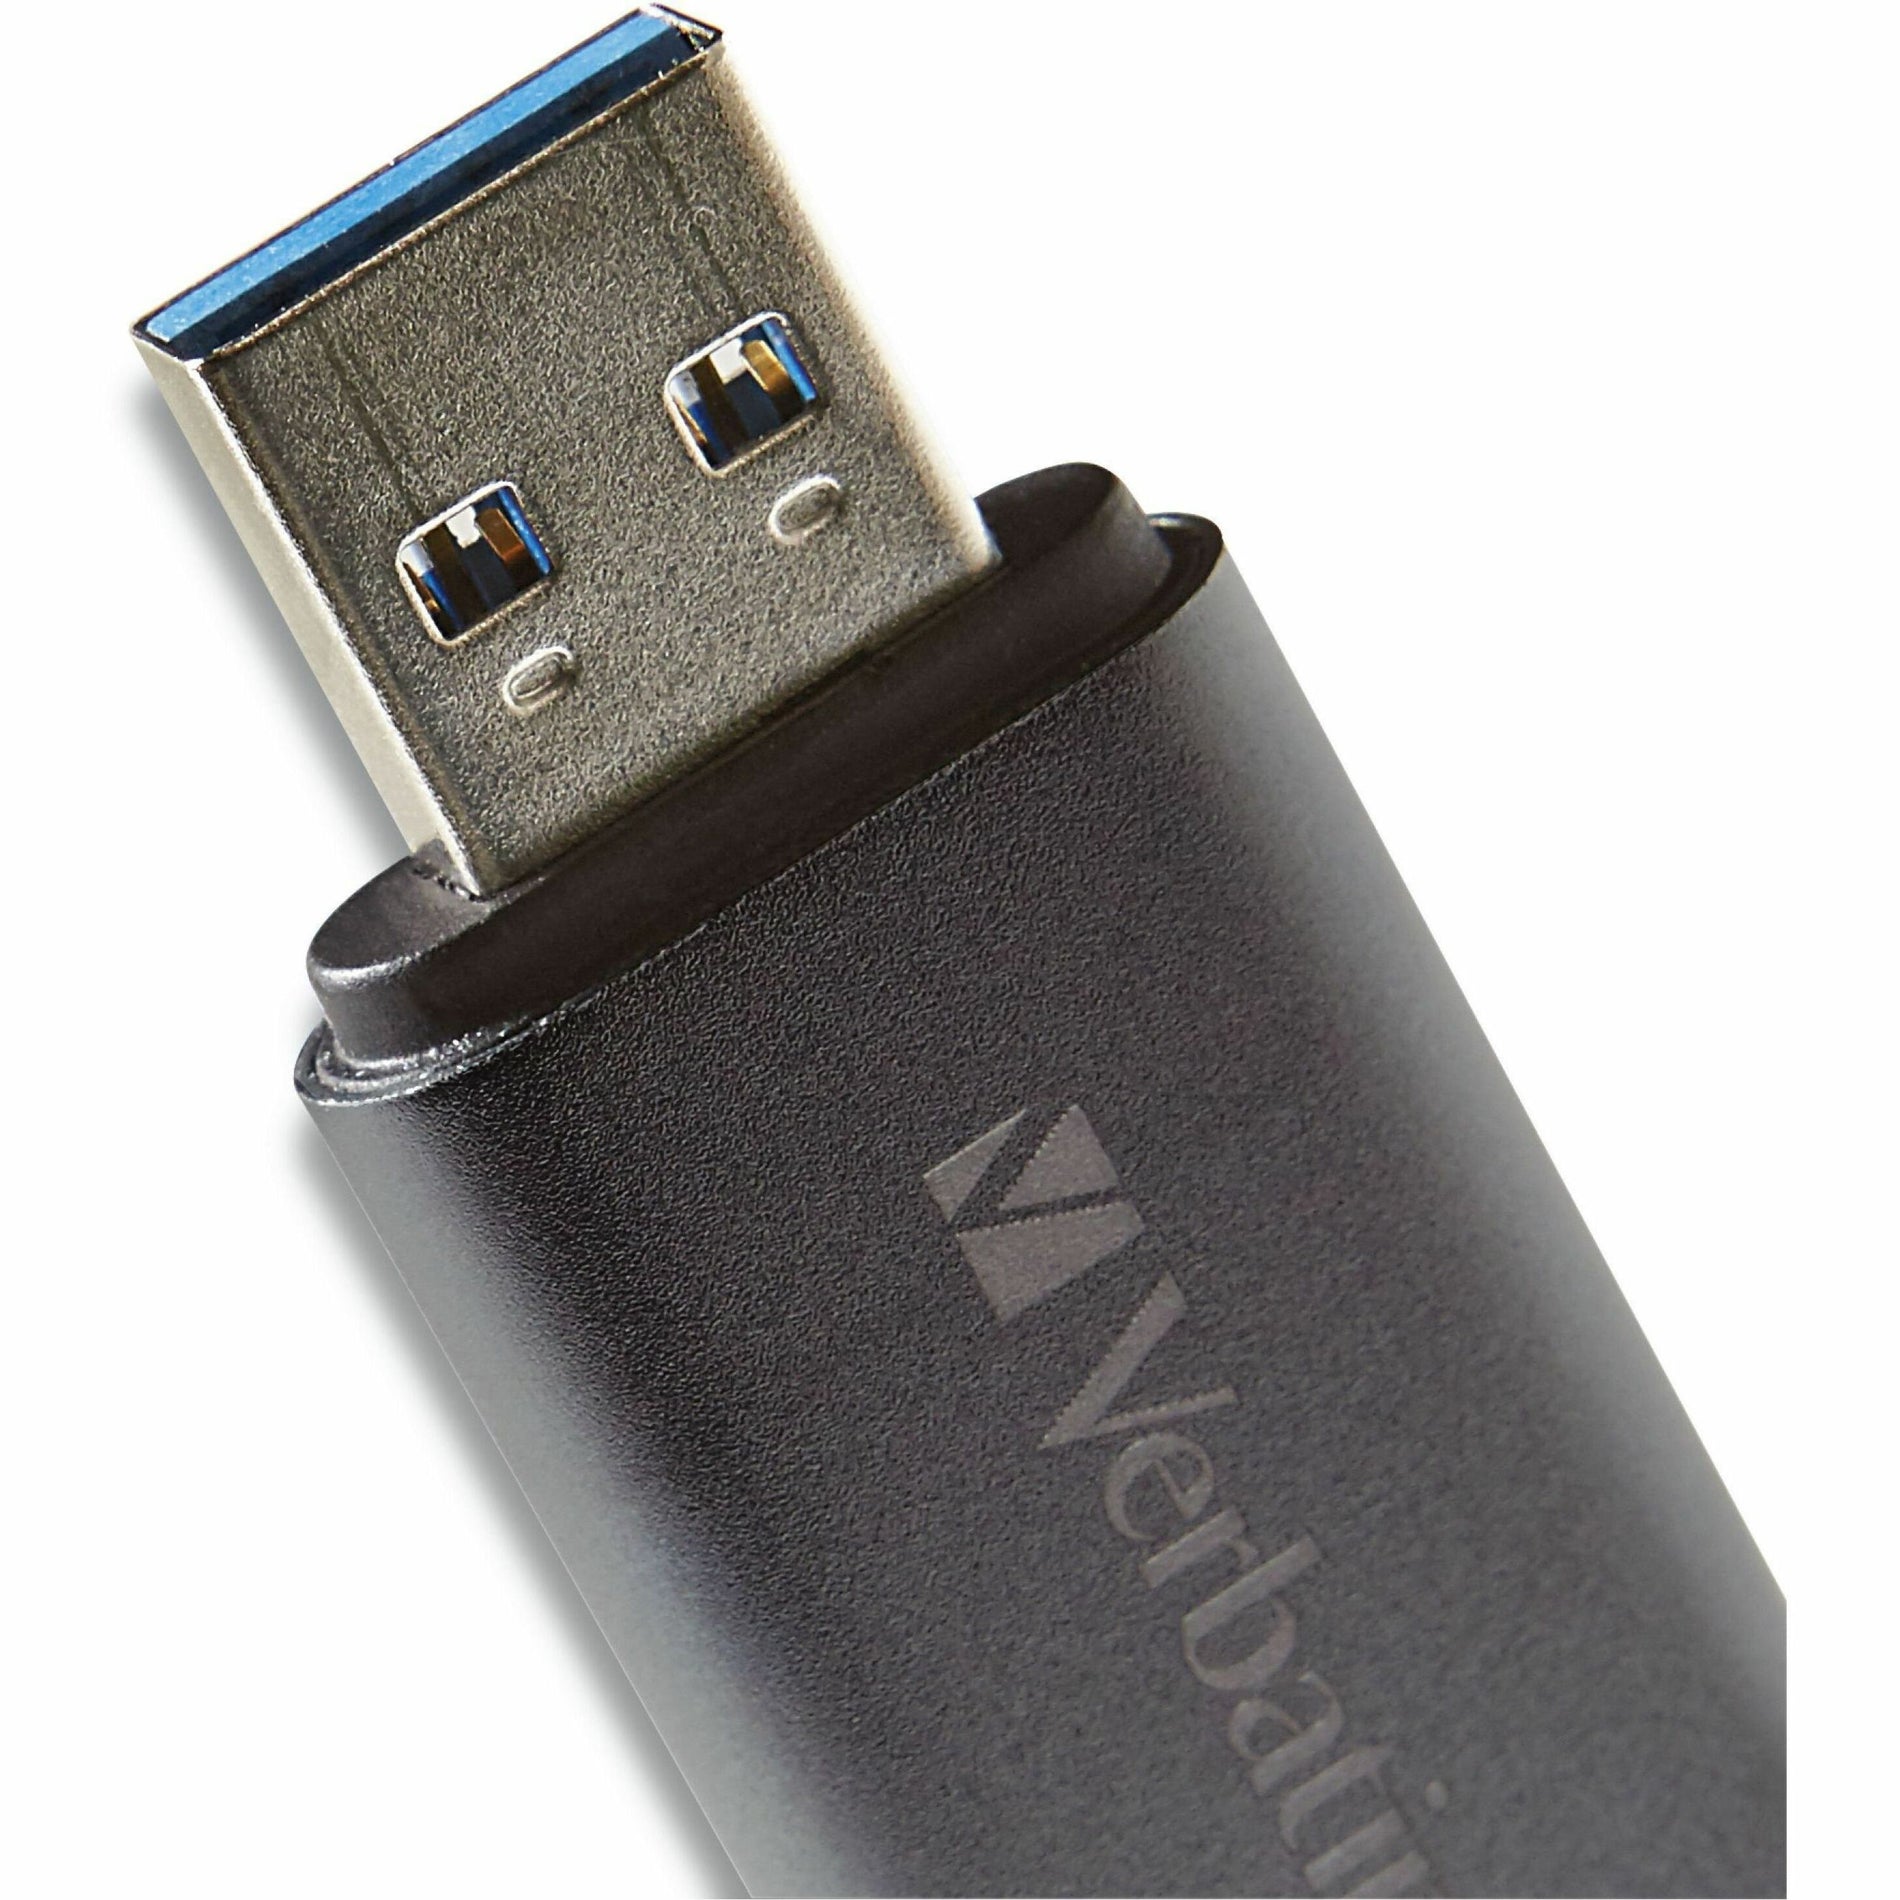 Verbatim 71276 Store 'n' Go Dual 128GB USB 3.2 (Gen 1) Type A Flash Drive, Graphite - For Apple Lightning Devices